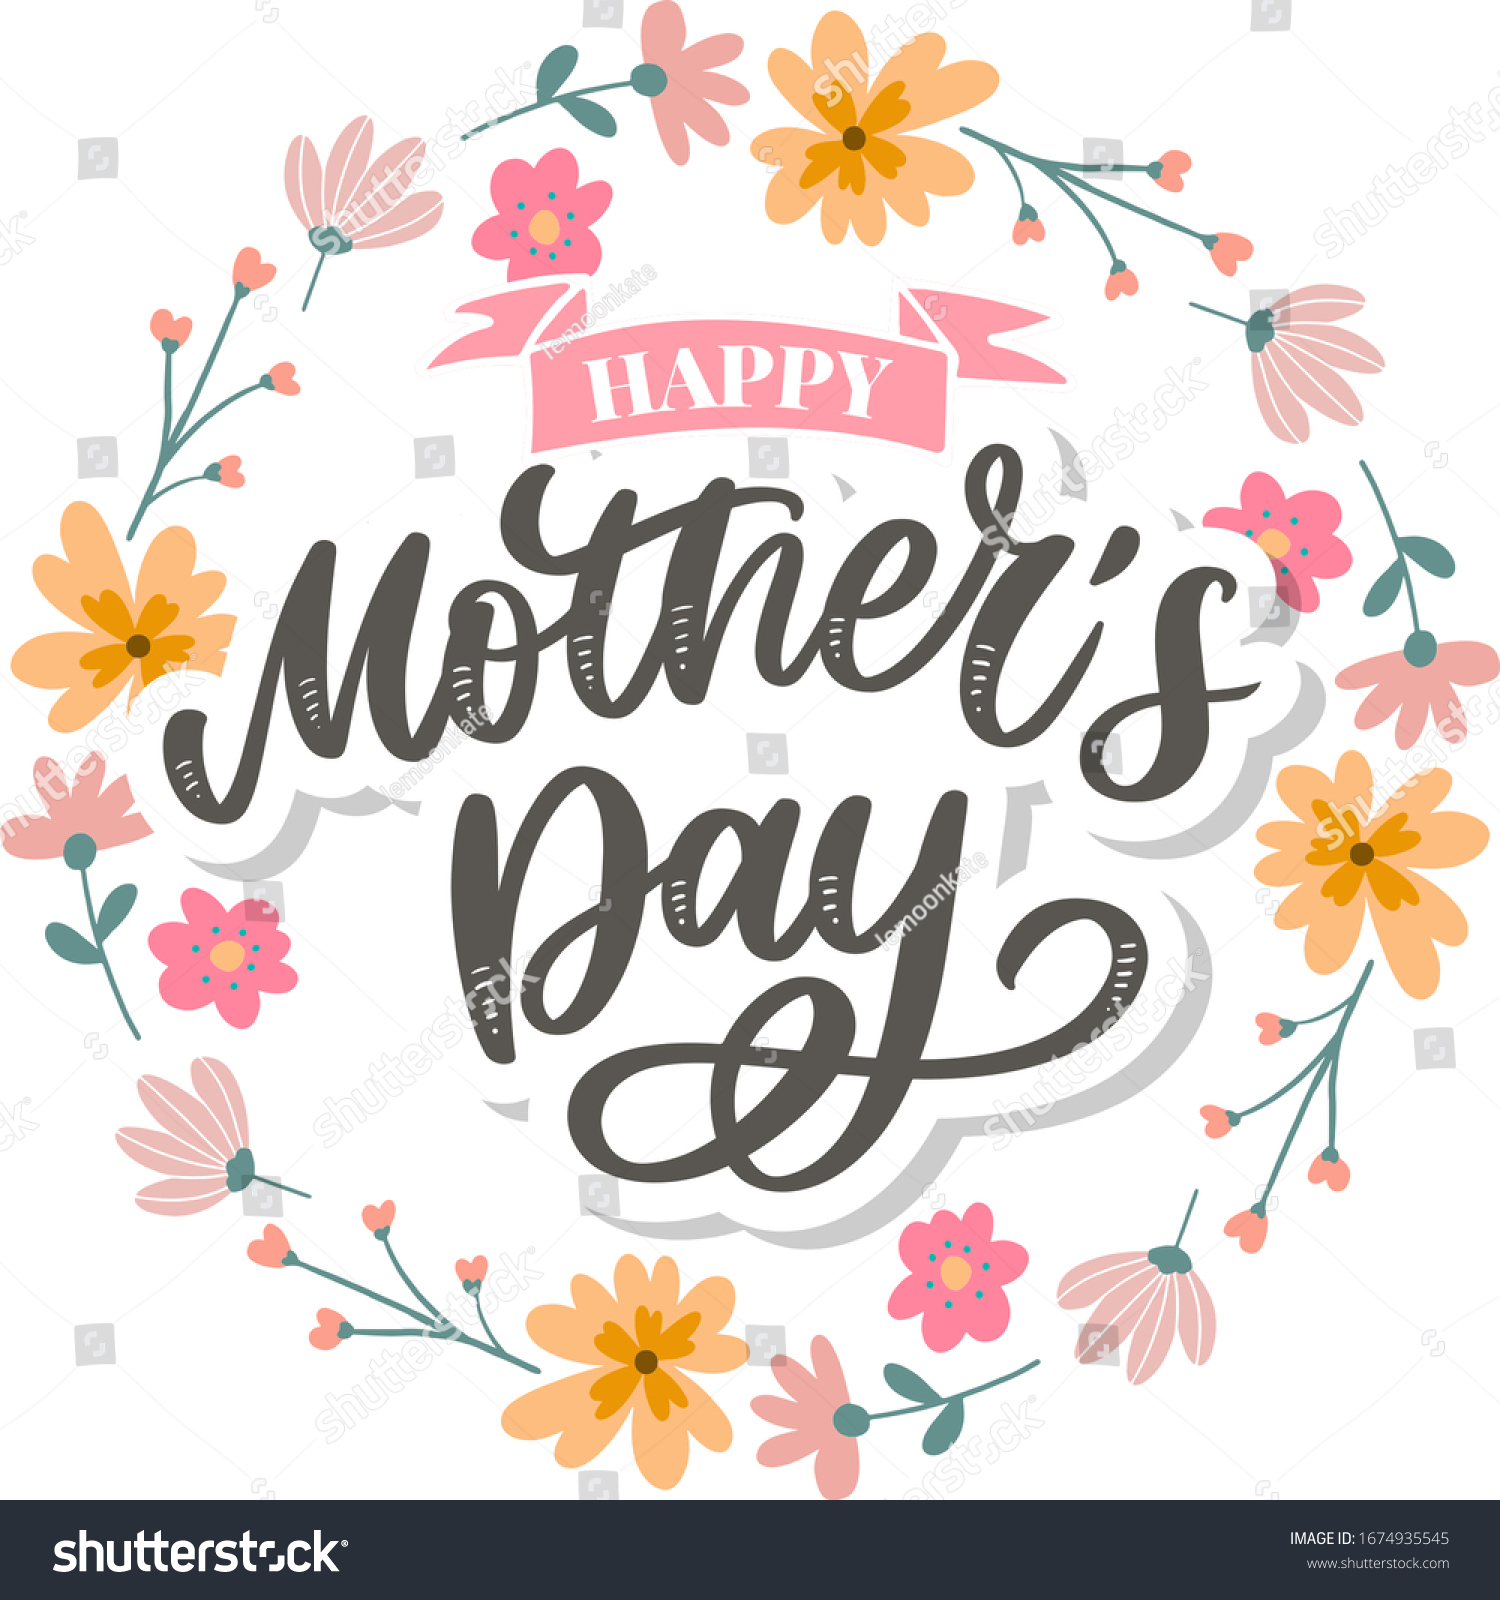 Happy Mothers Day lettering. Handmade calligraphy vector illustration. Mother's day card with flowers #1674935545